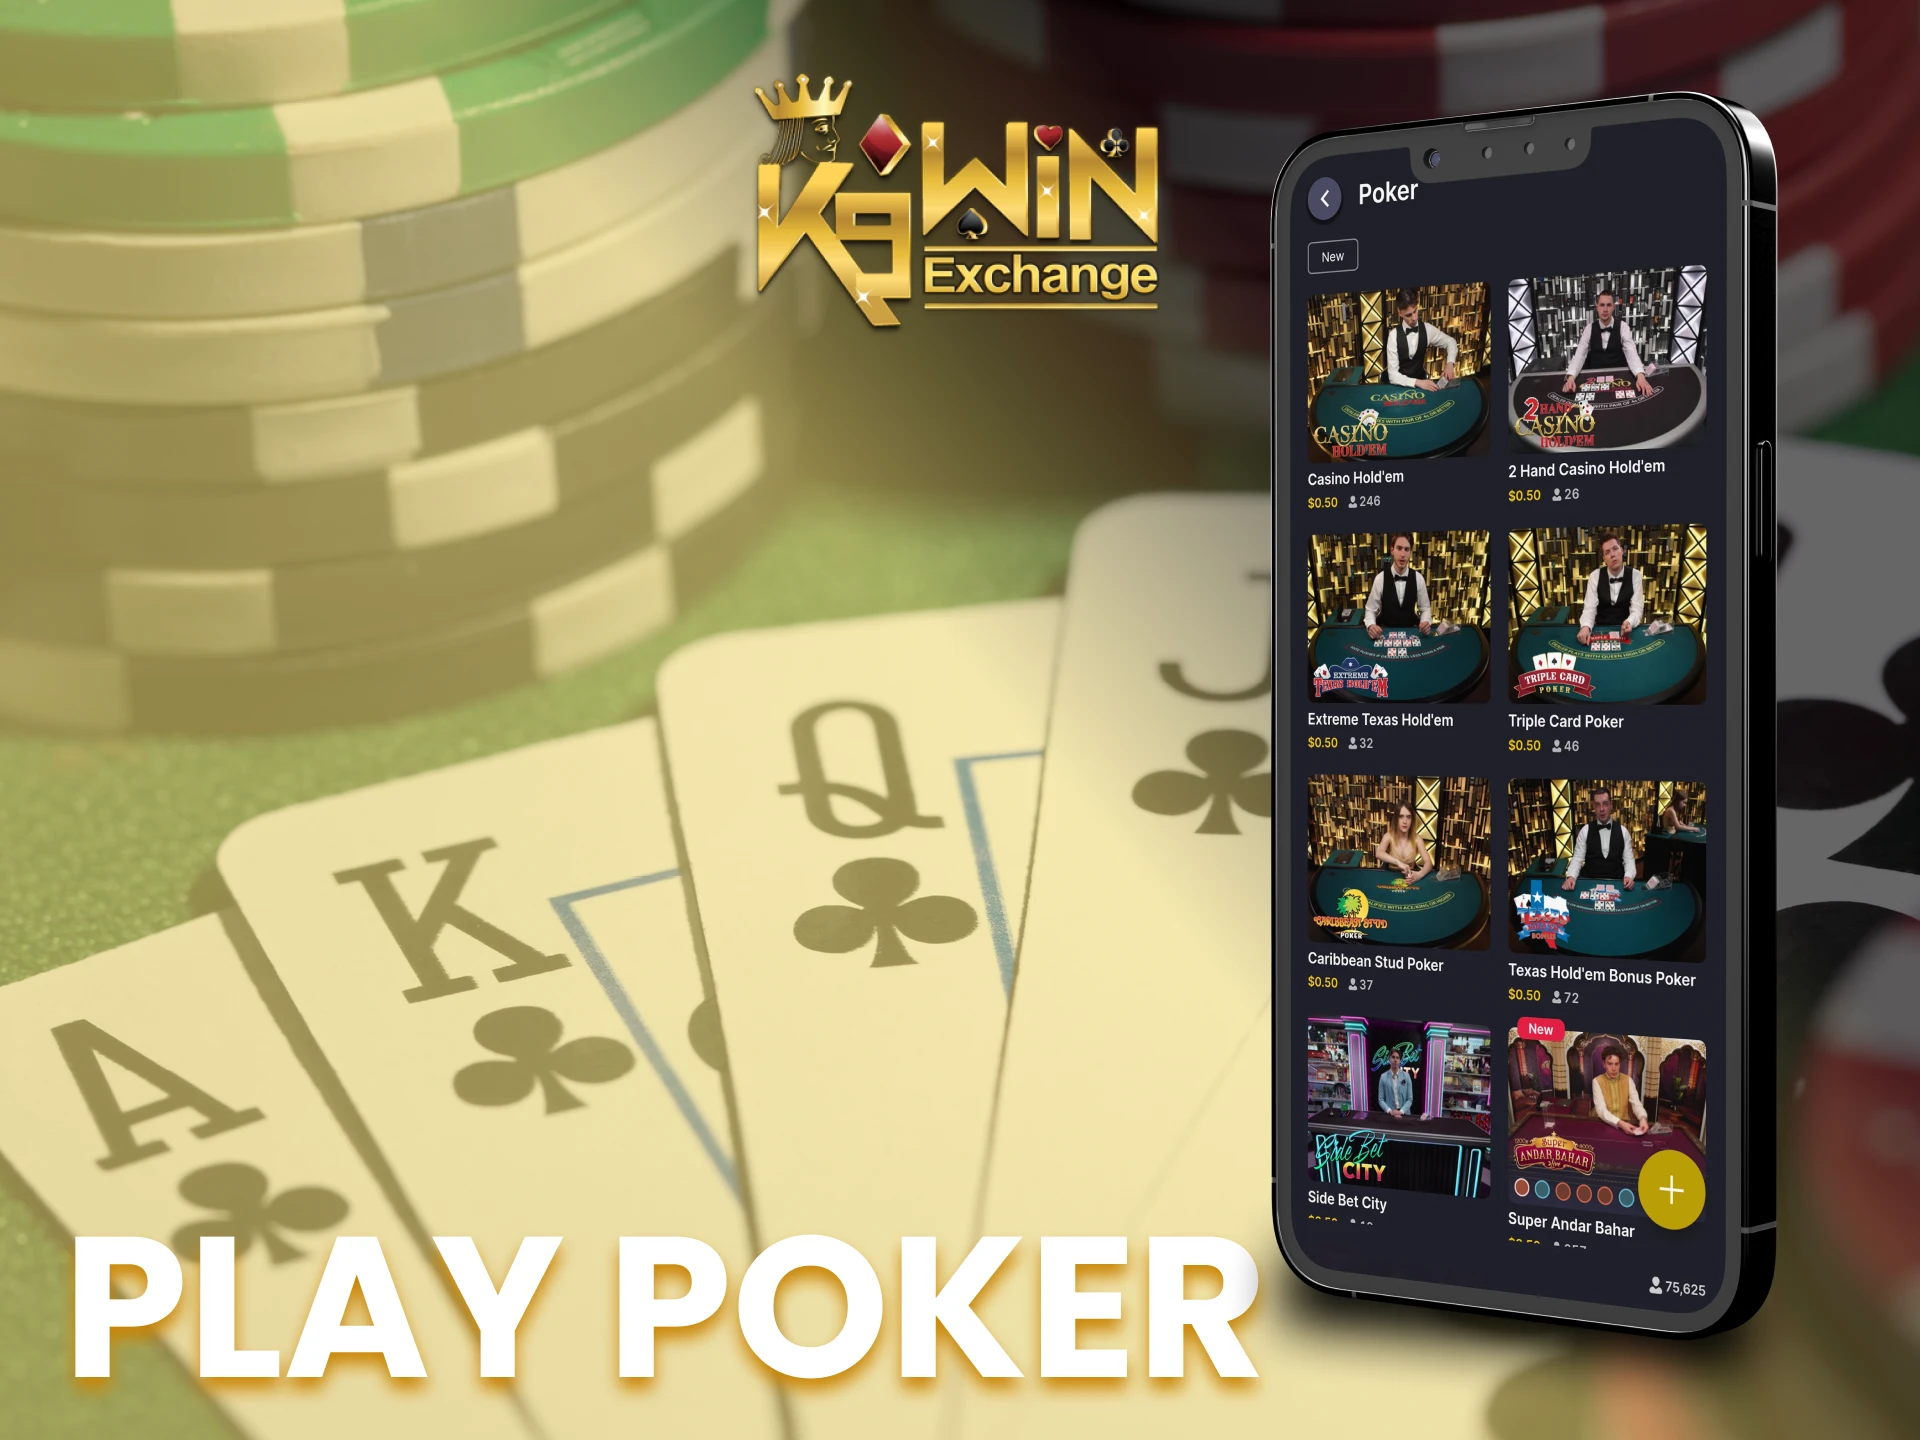 Play poker with real people in the K9Win app.